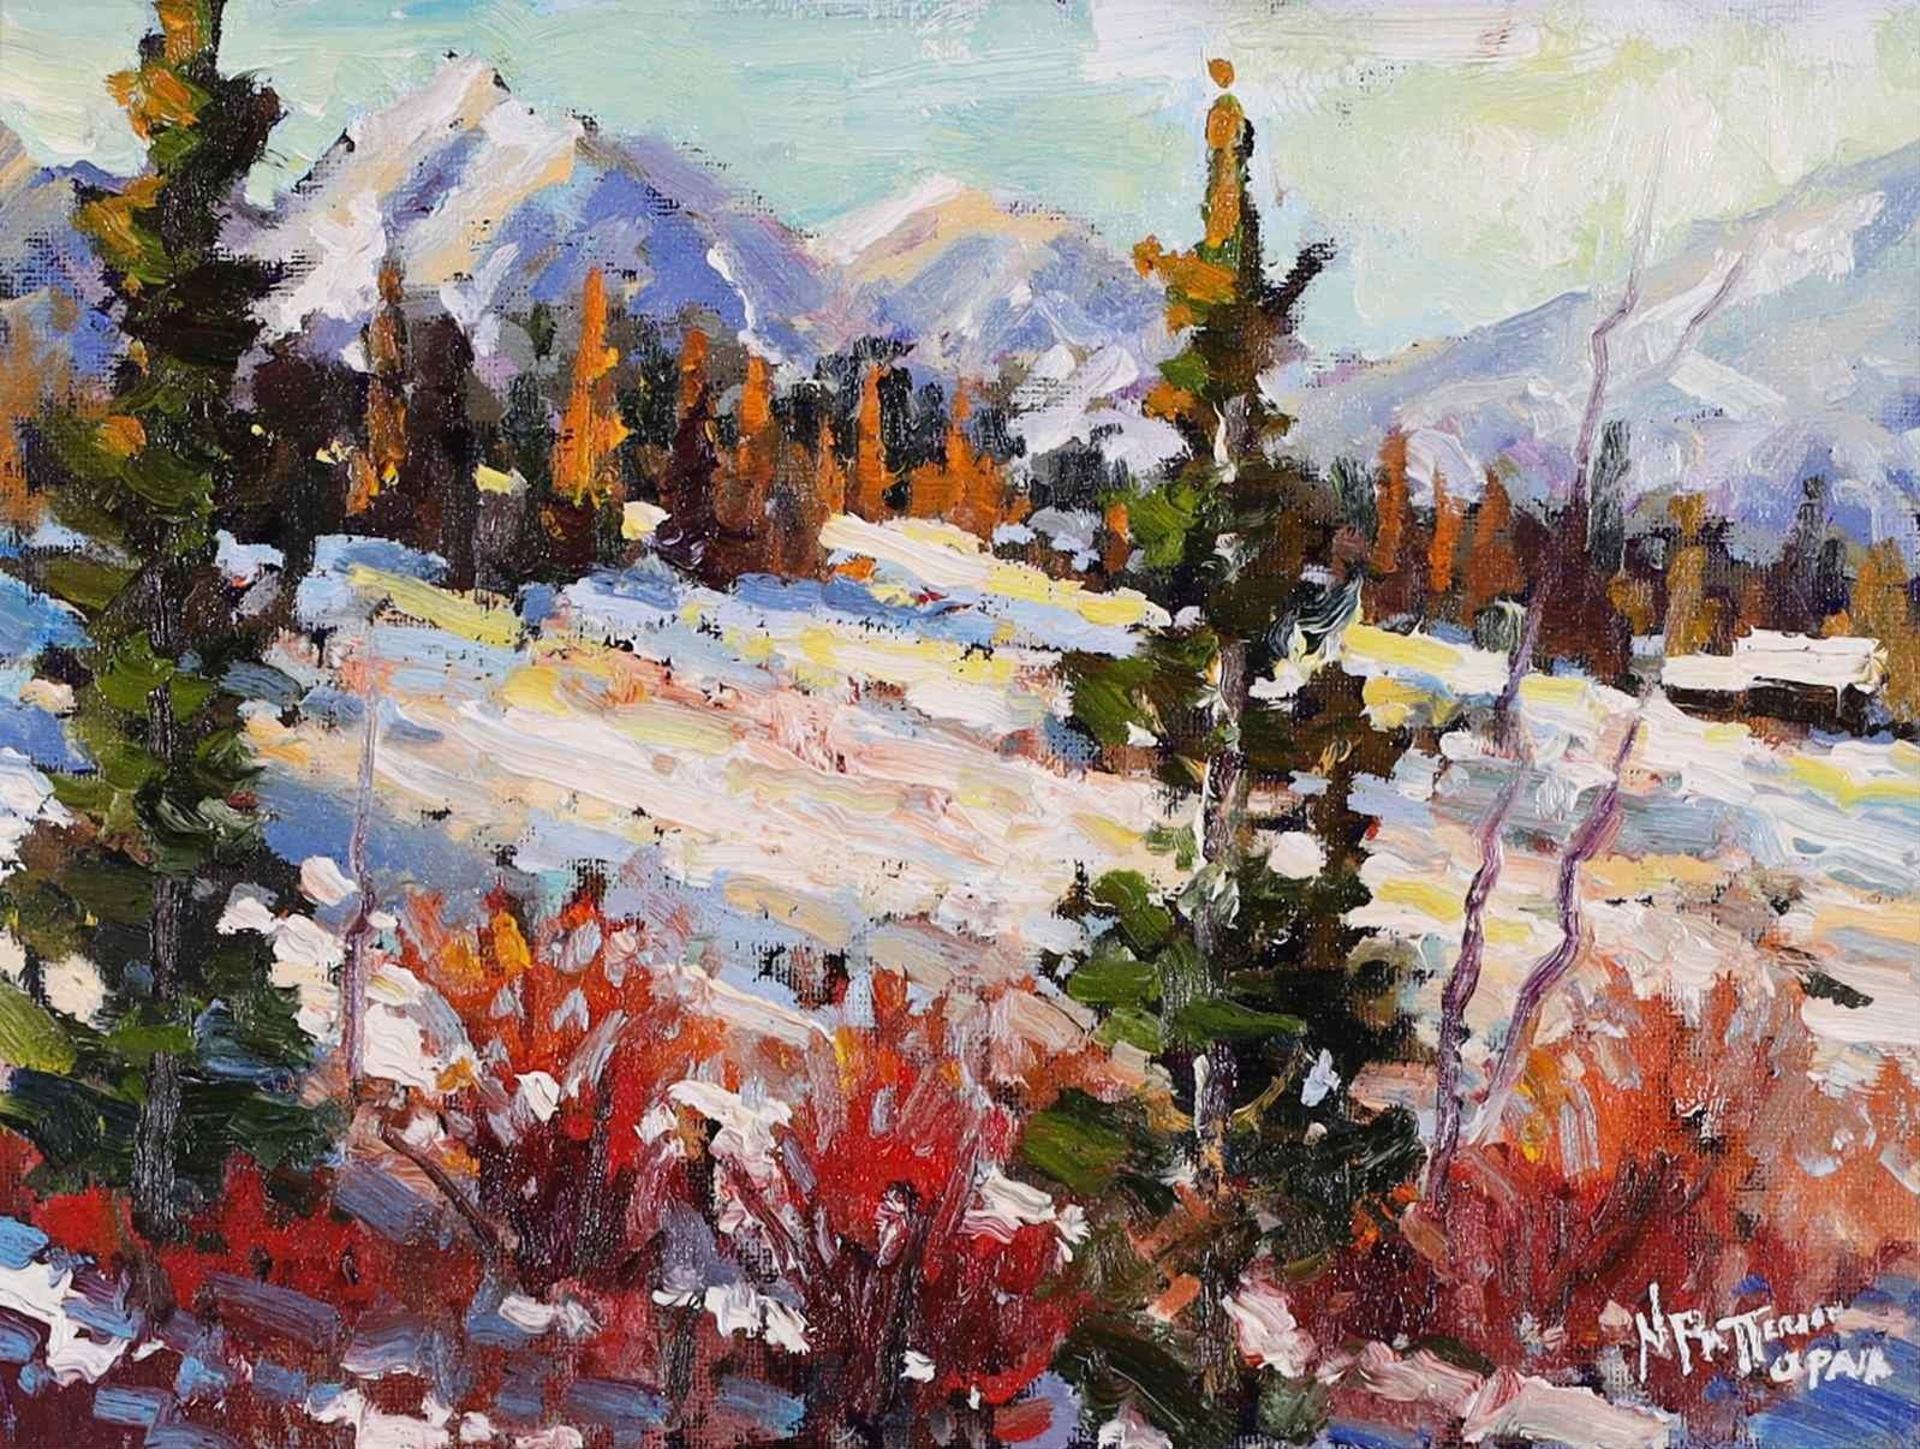 Neil Patterson (1947) - Foothills Winter